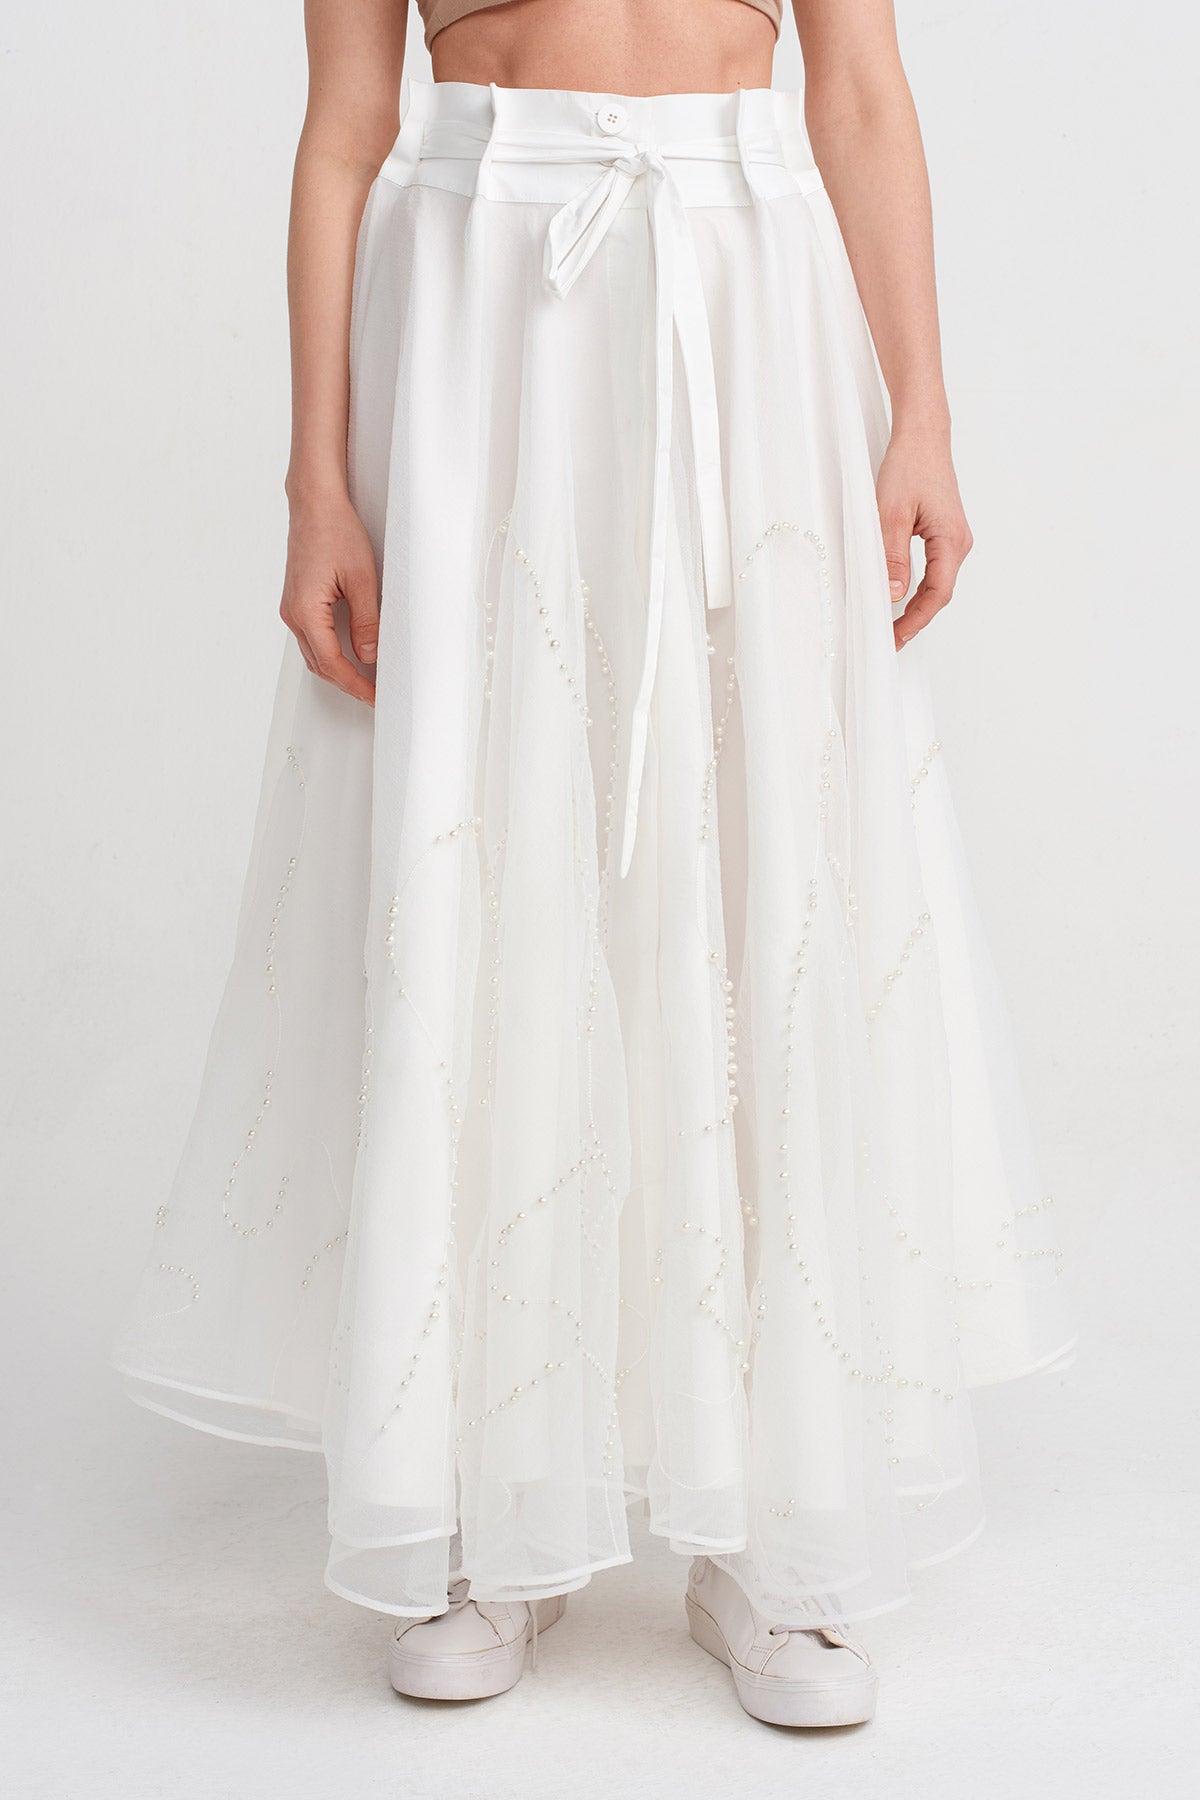 Off White Organza Skirt with Pearl Embellishments-Y242012022